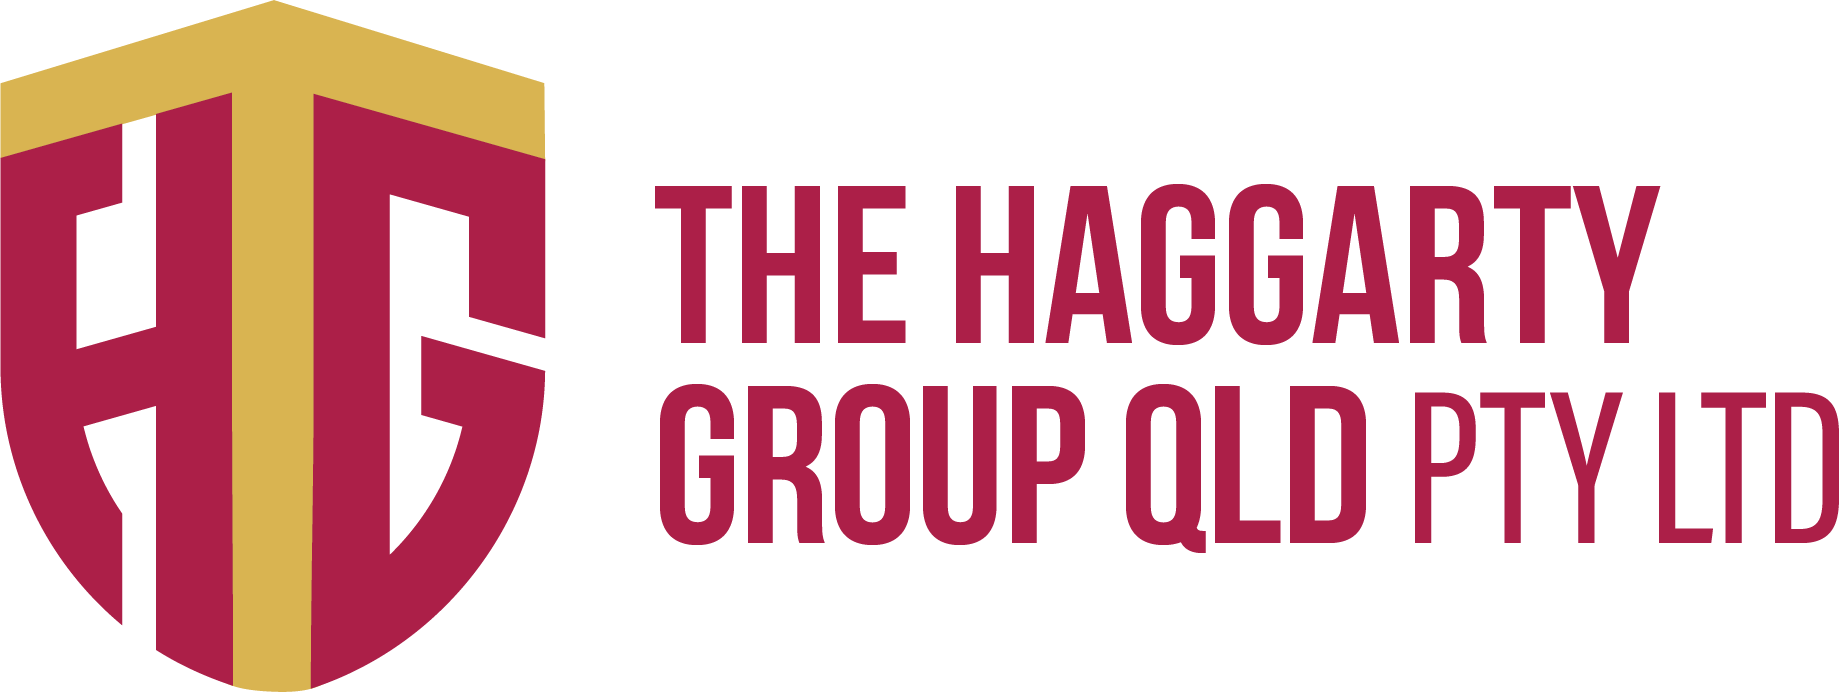 The Haggarty Group, Building & Construction Supplies, Ipswich